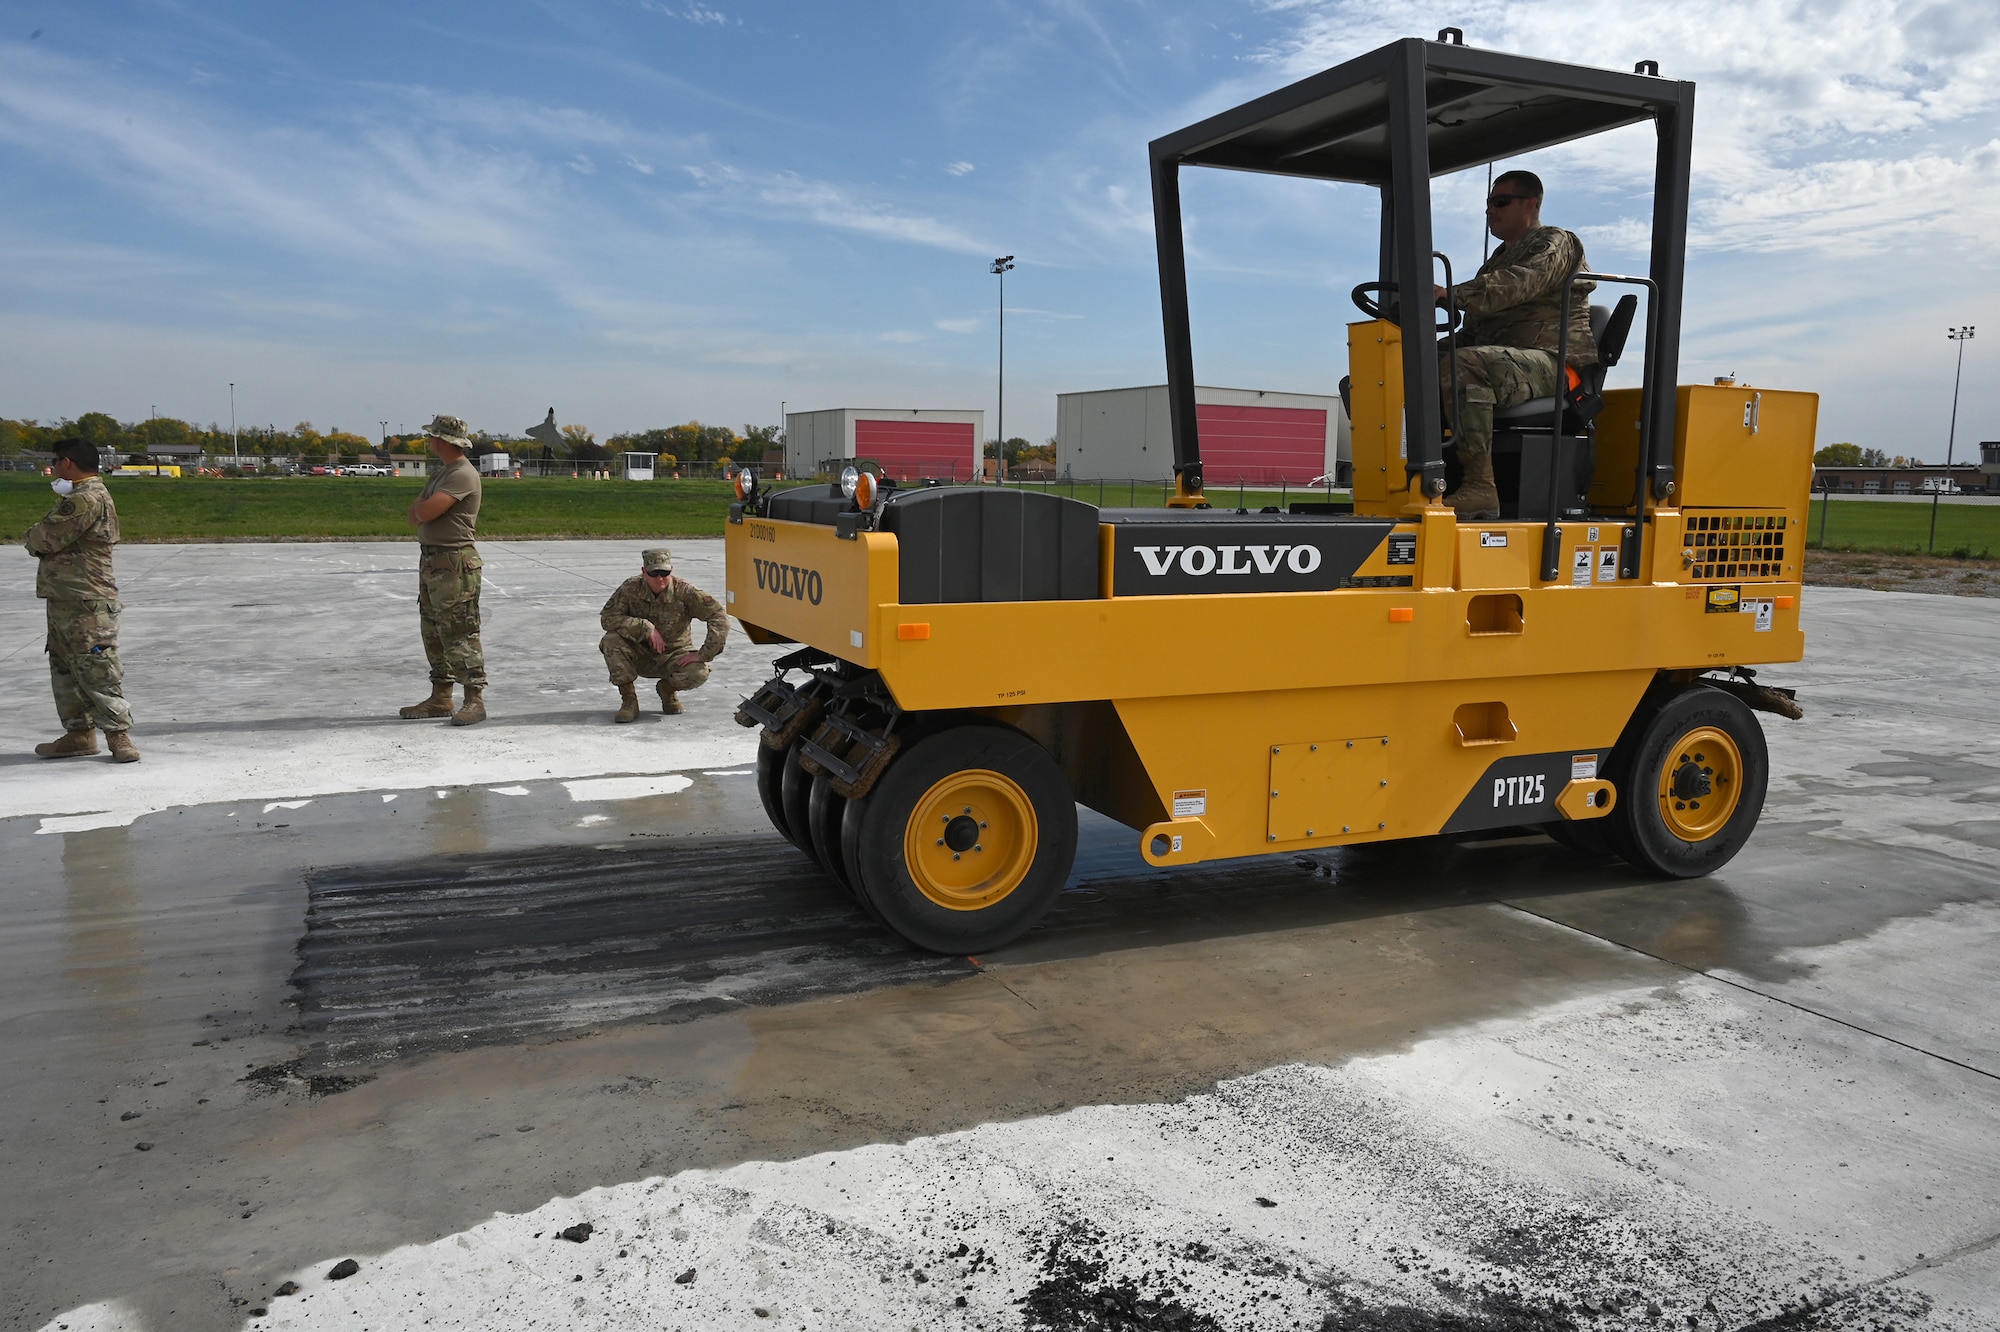 A military member operates a wheeled asphalt compactor as he levels an asphalt patch on a concrete training runway at the North Dakota Air National Guard Regional Training Site, Fargo, N.D., Sept. 29, 2021.